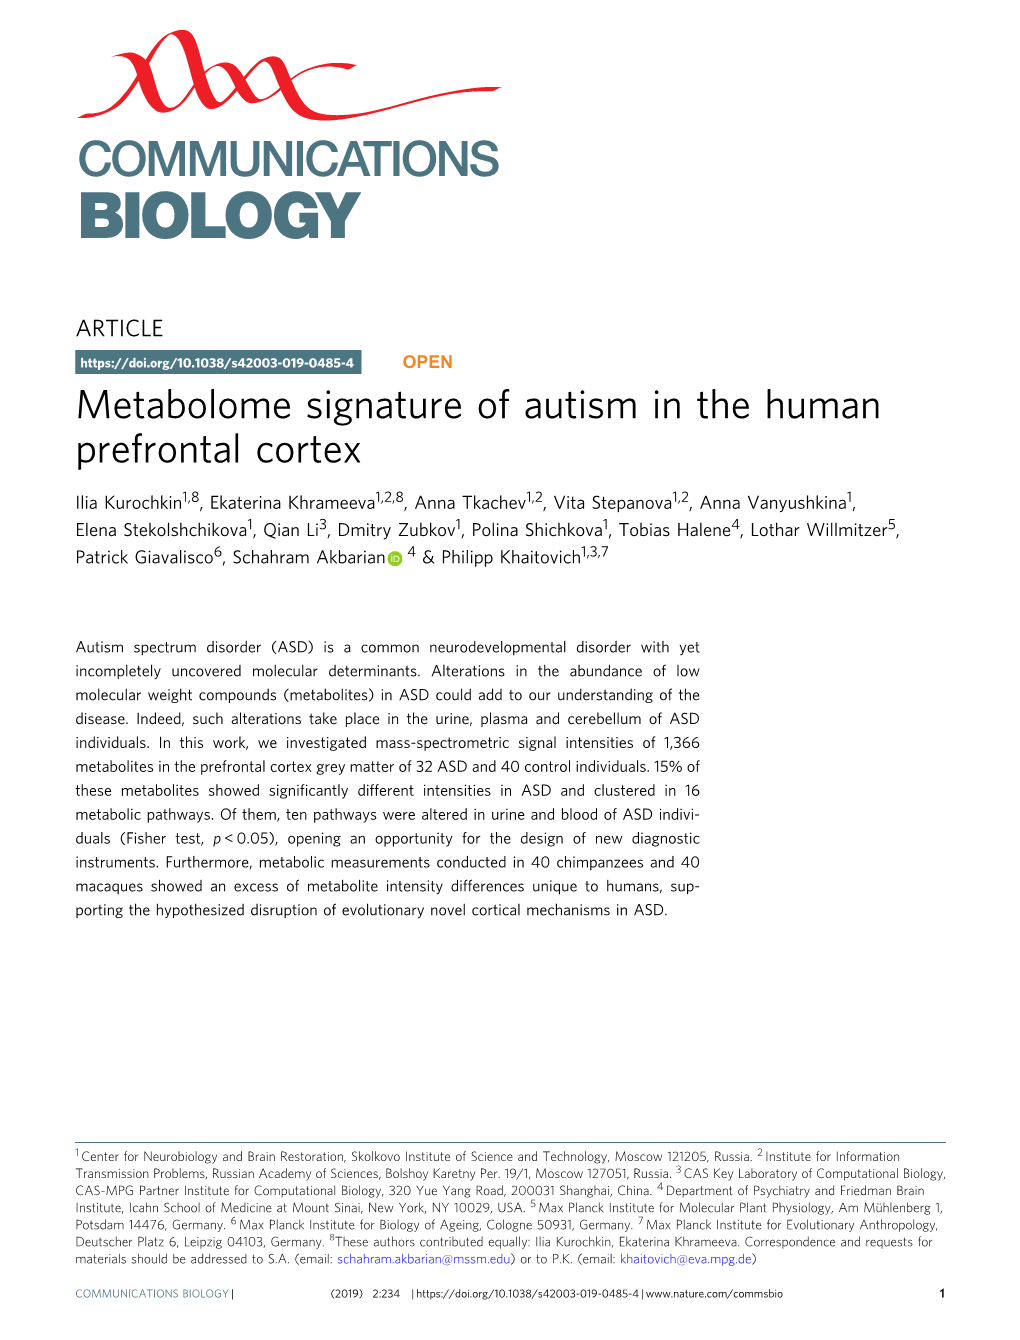 Metabolome Signature of Autism in the Human Prefrontal Cortex